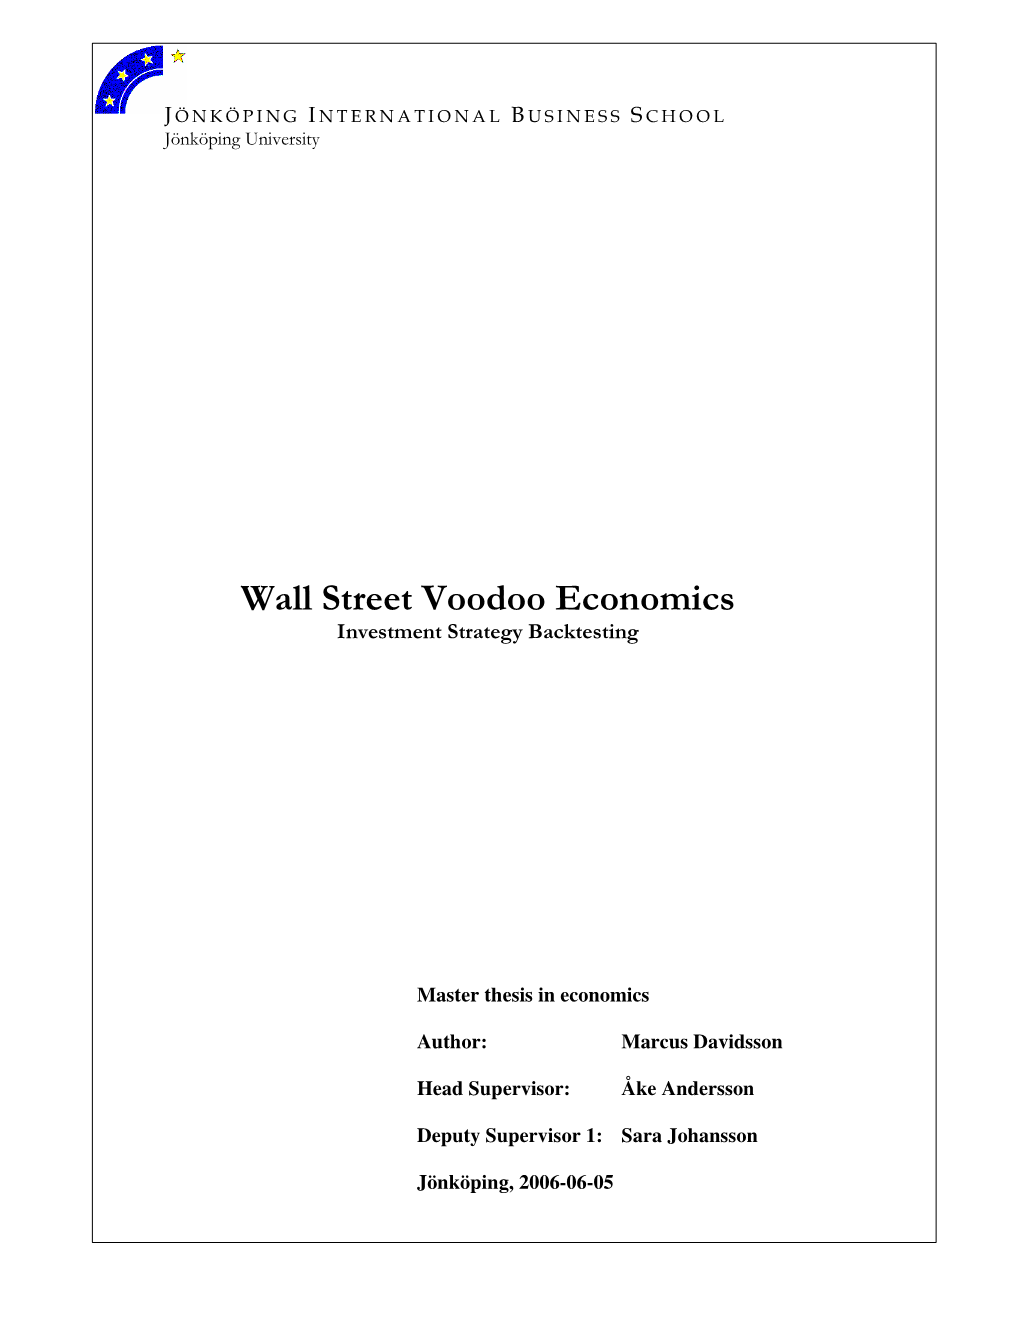 Wall Street Voodoo Economics Investment Strategy Backtesting